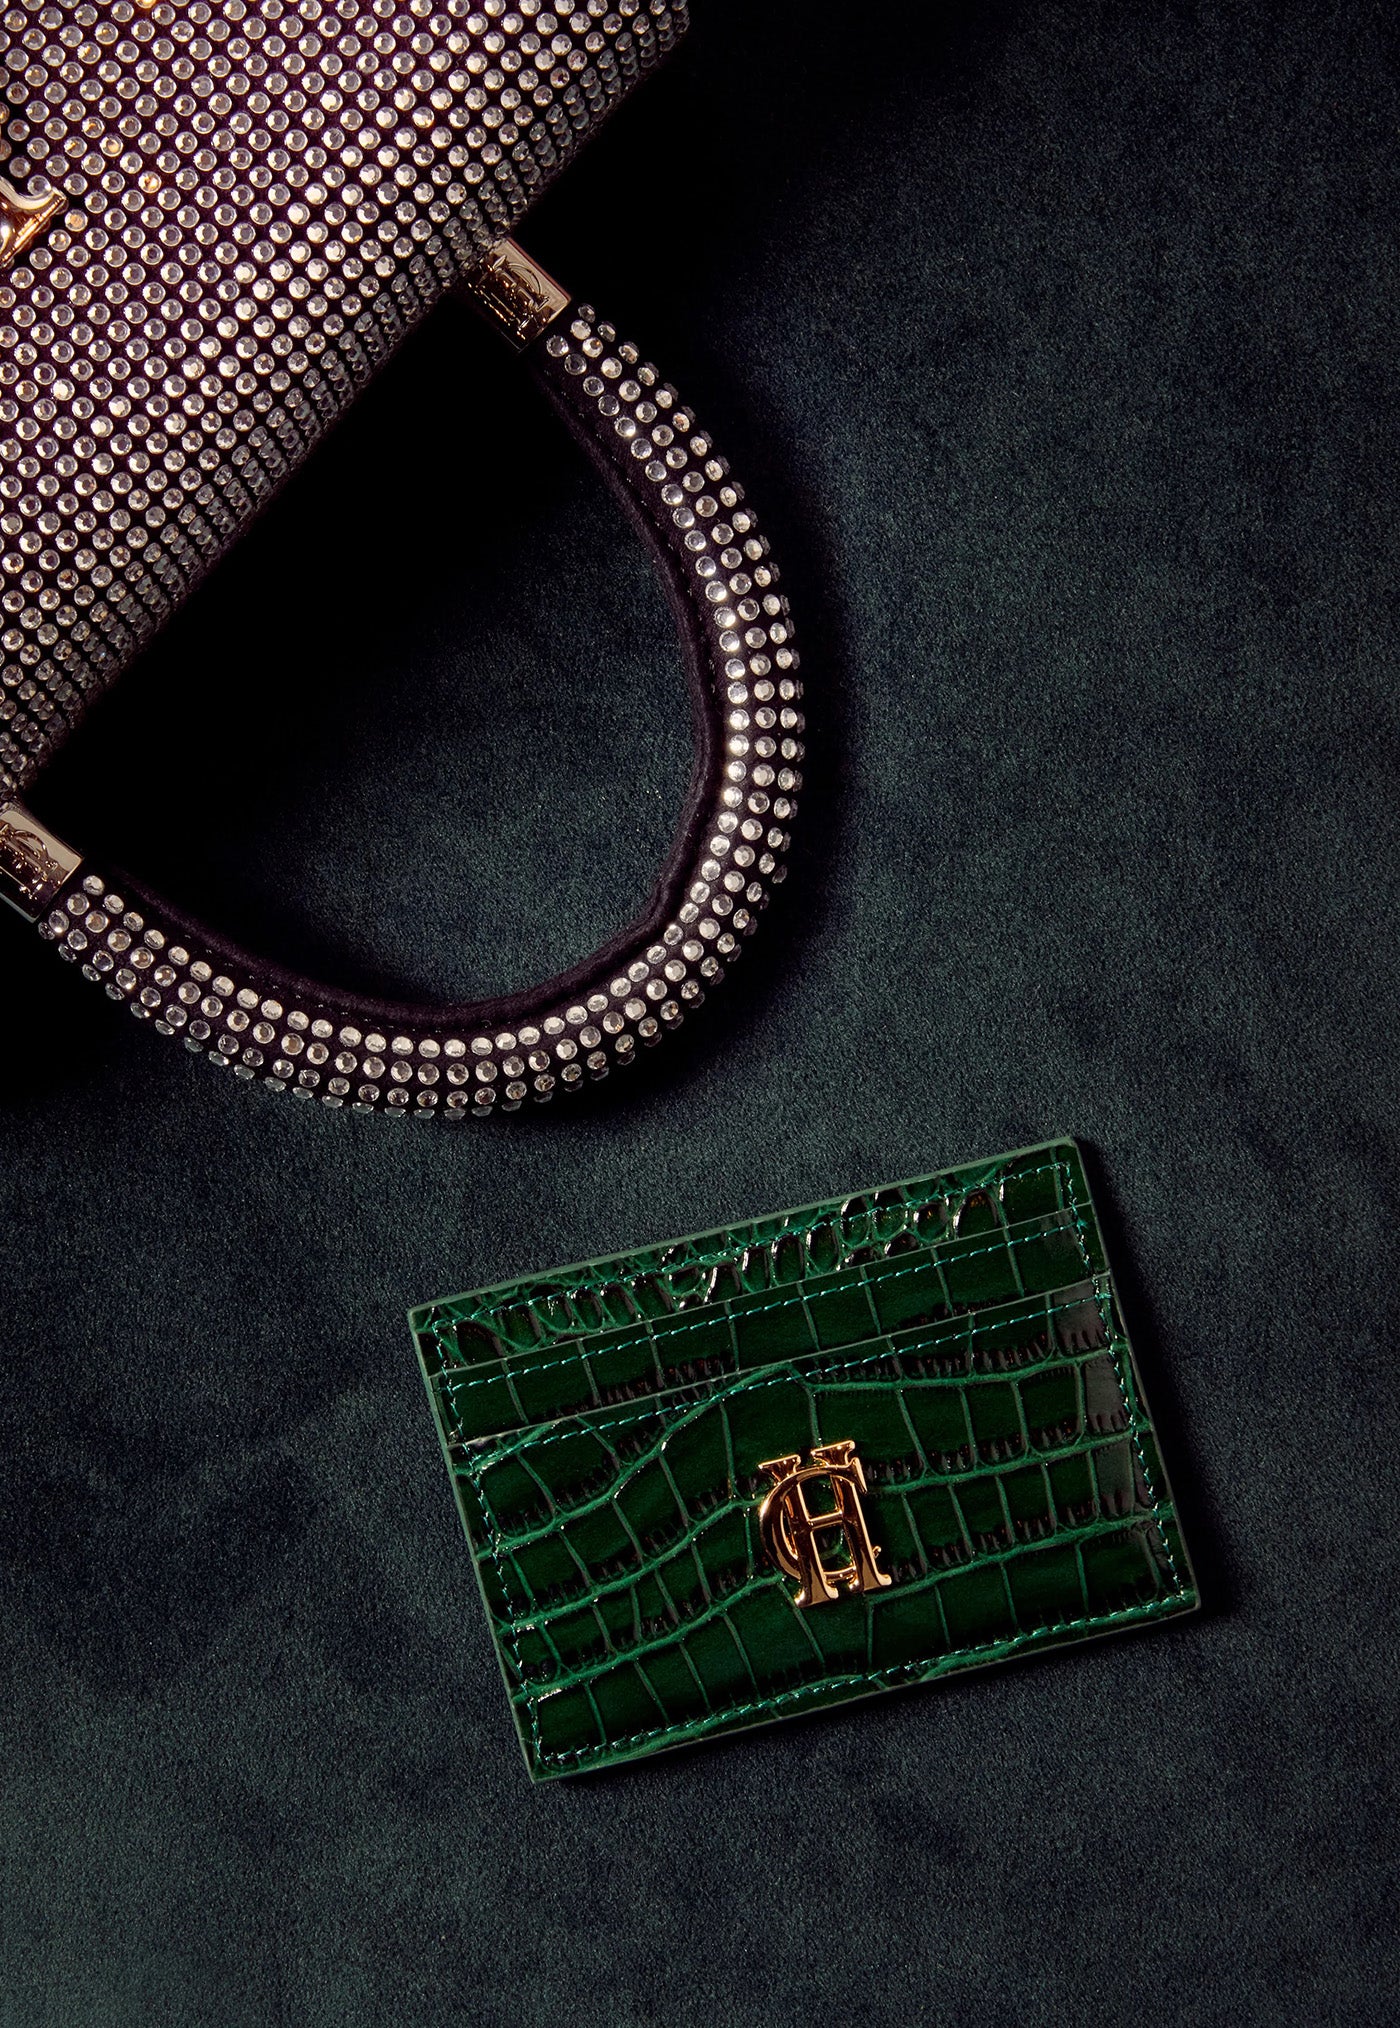 Chelsea Card Holder - Emerald Croc sold by Angel Divine